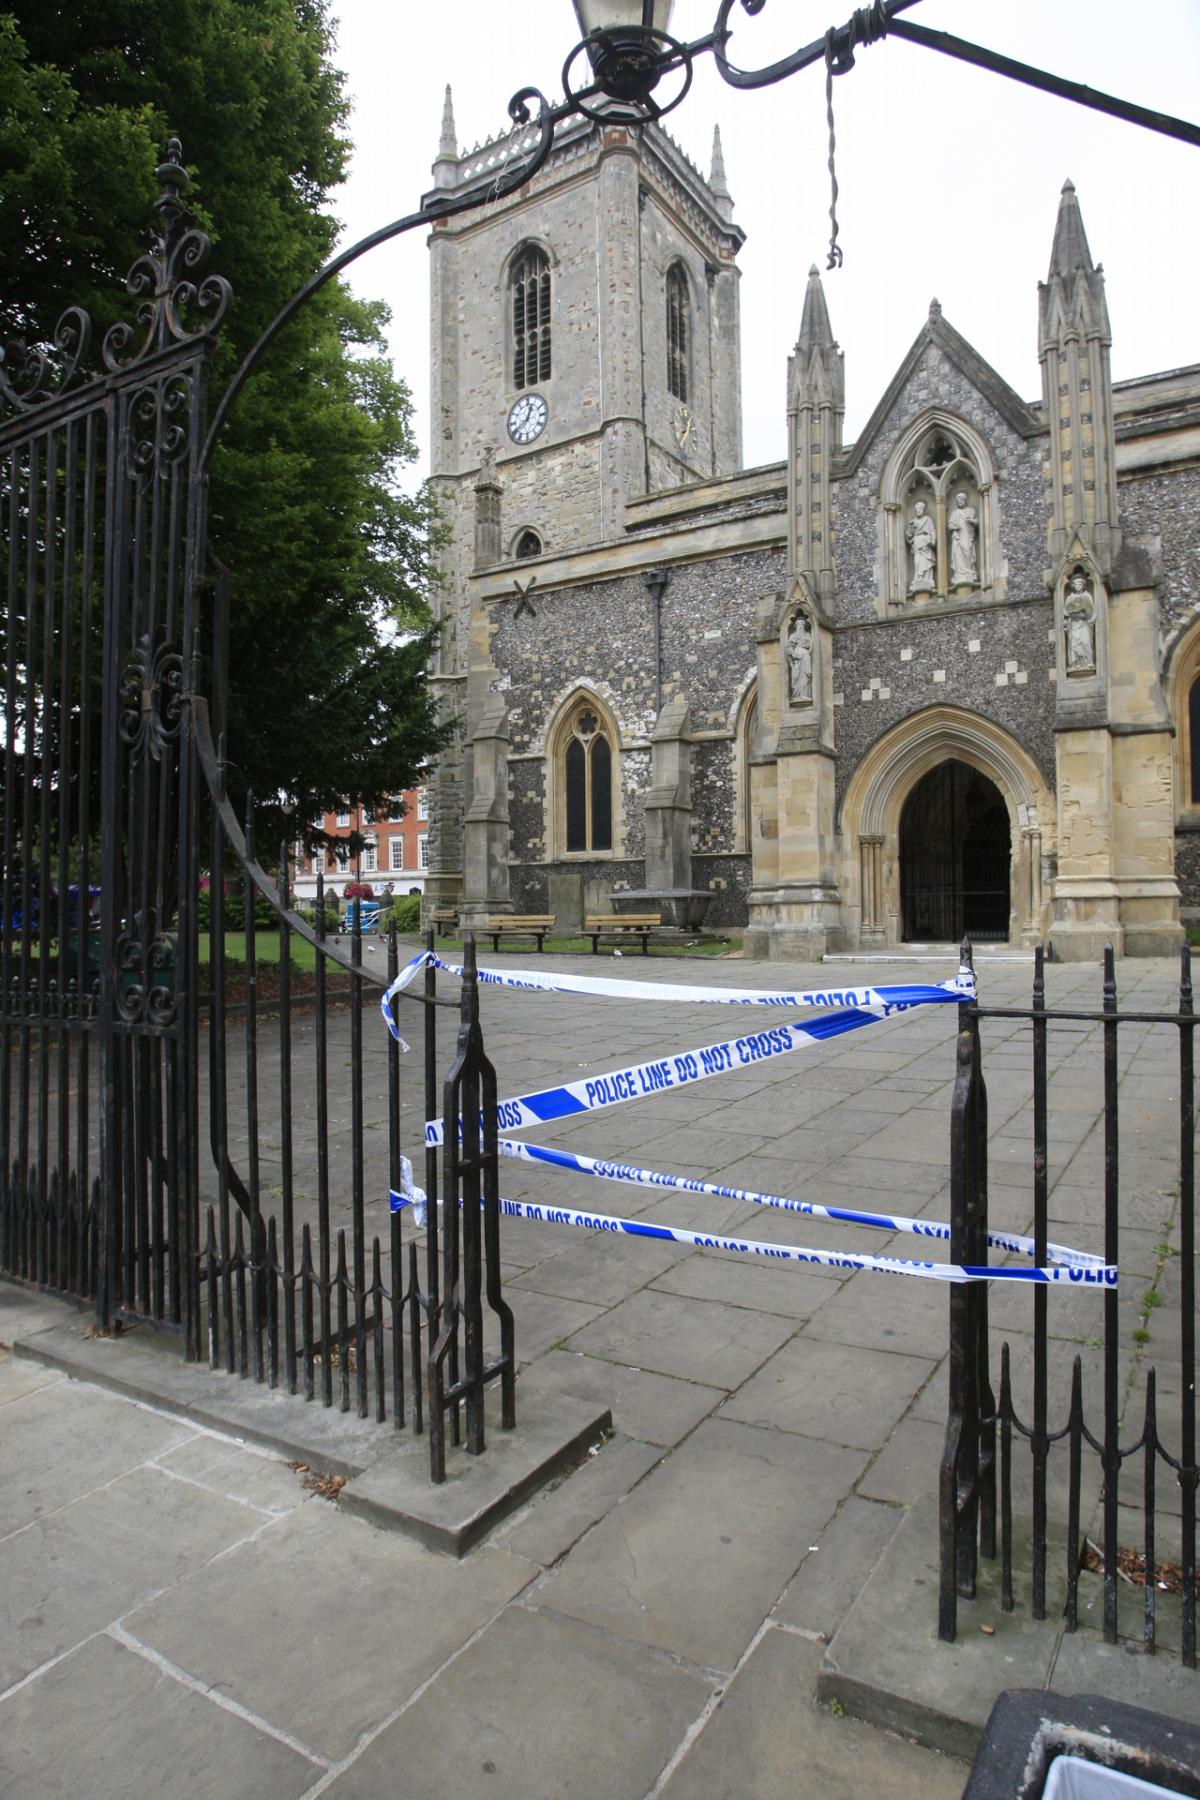 Pictures from scene of Lee Gillespie's death